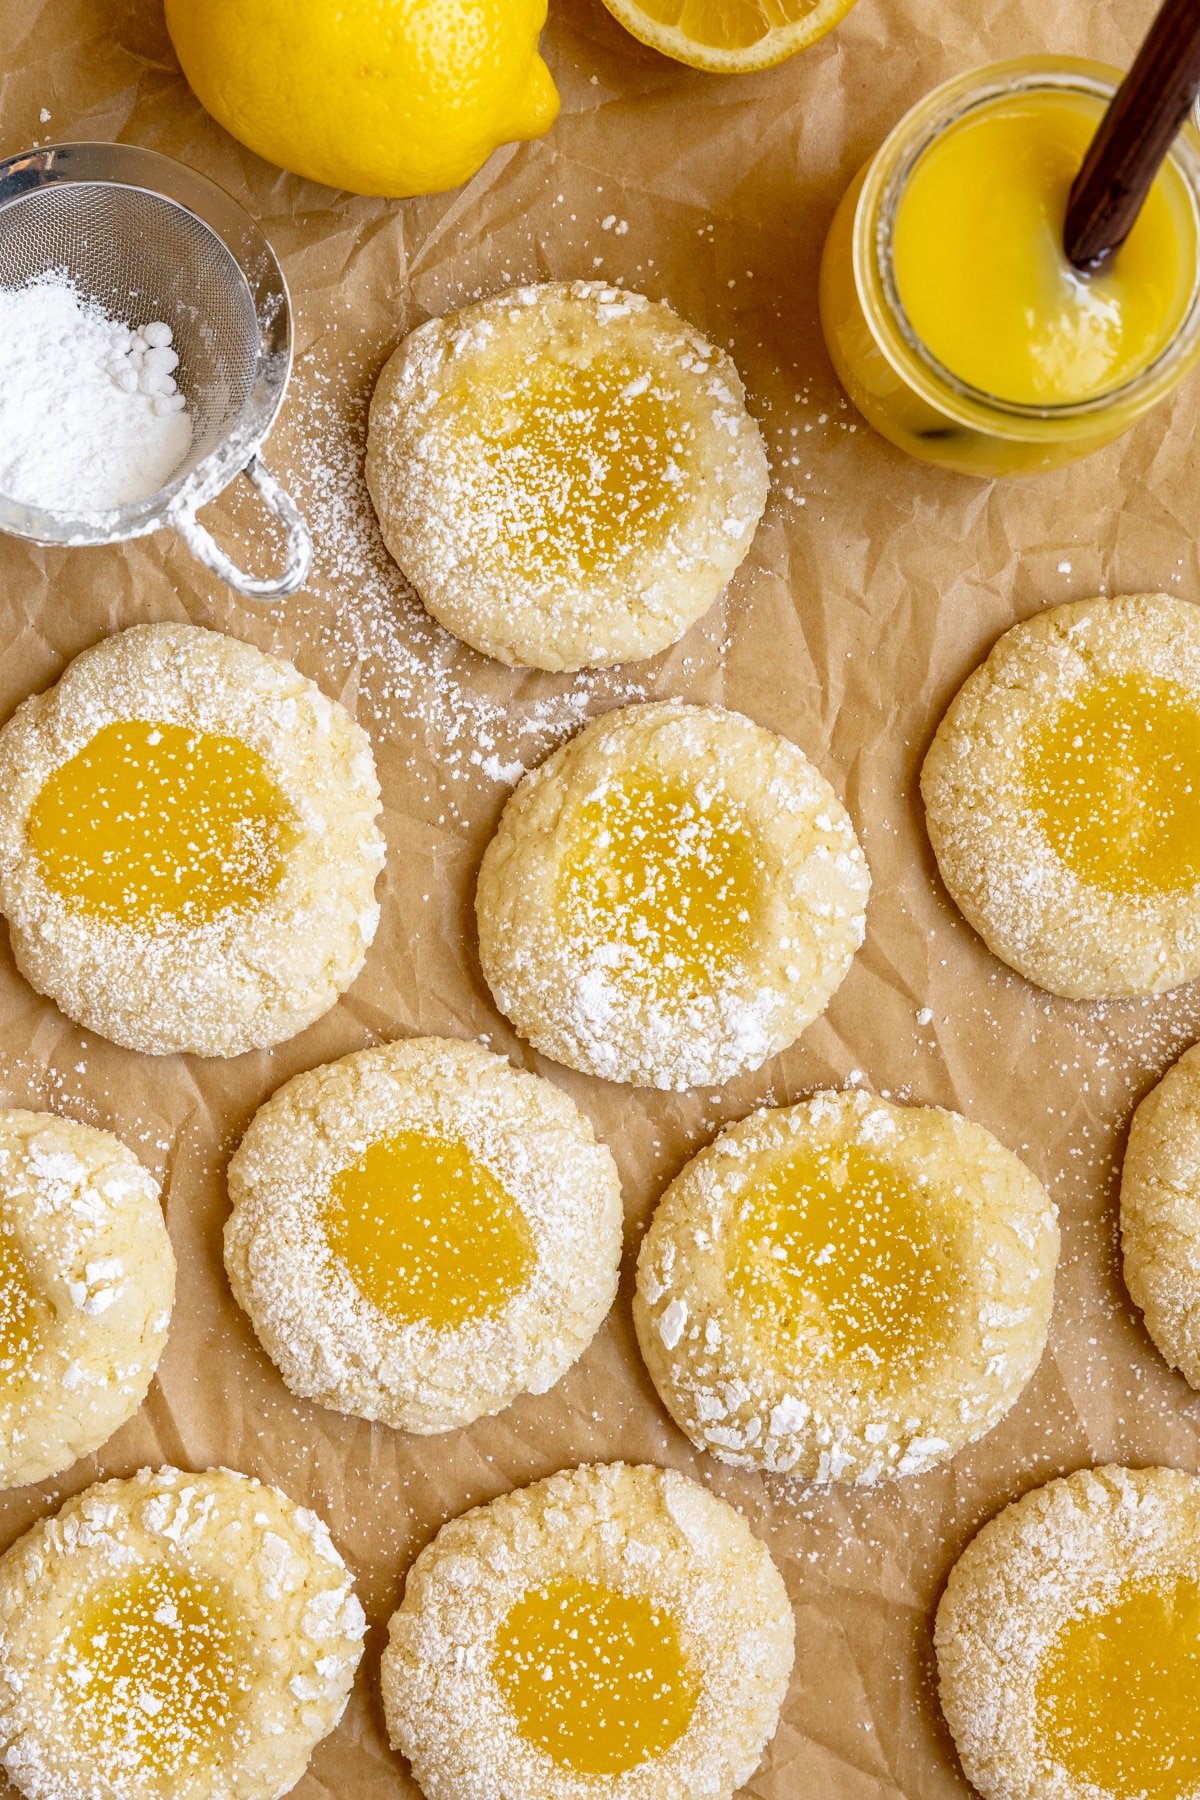 freshly baked cookies on parchment paper filled with lemon.